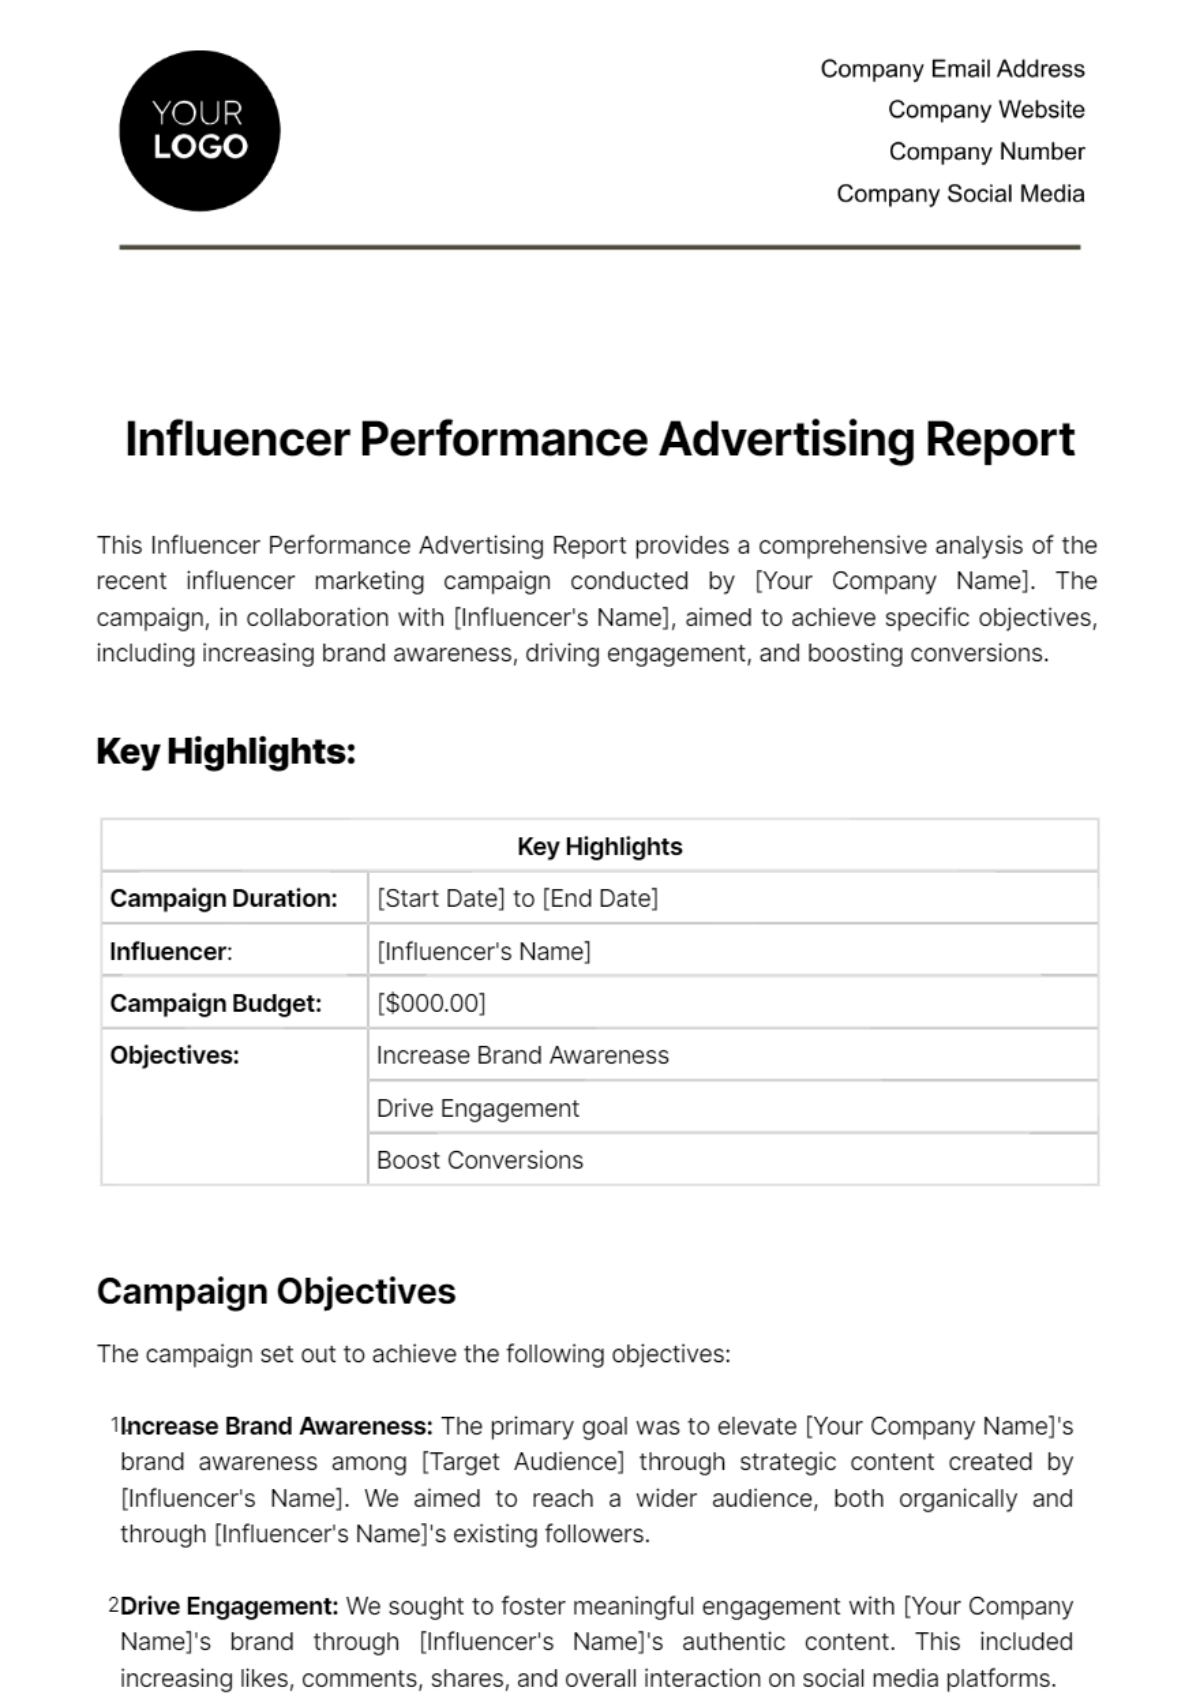 Influencer Performance Advertising Report Template